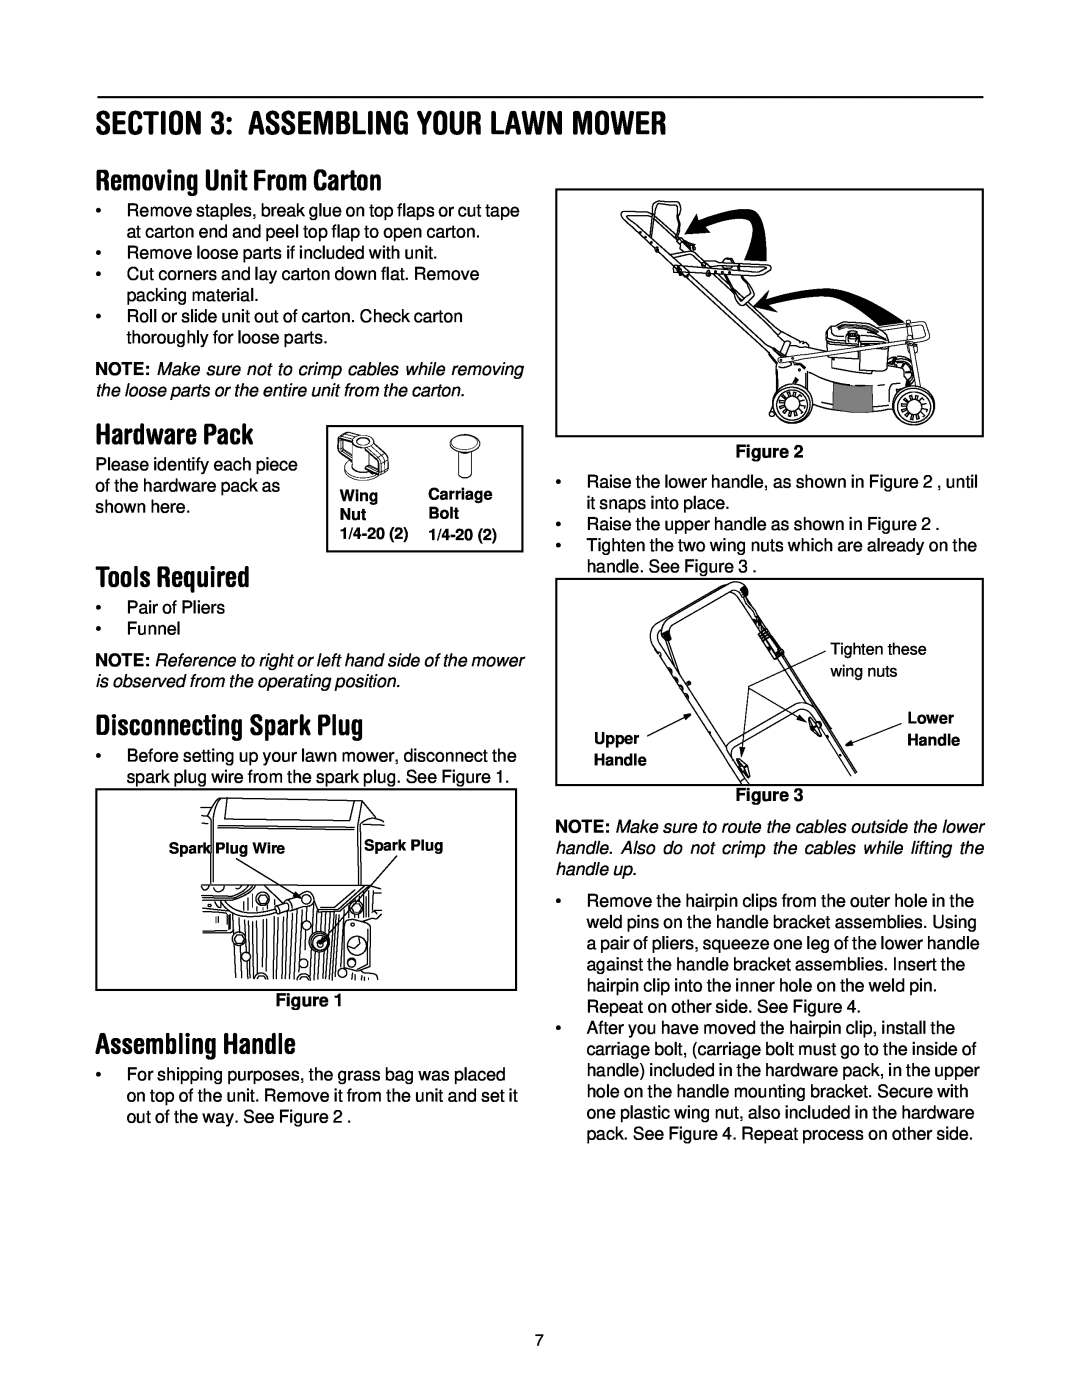 Troy-Bilt 436 Assembling Your Lawn Mower, Removing Unit From Carton, Hardware Pack, Tools Required, Assembling Handle 